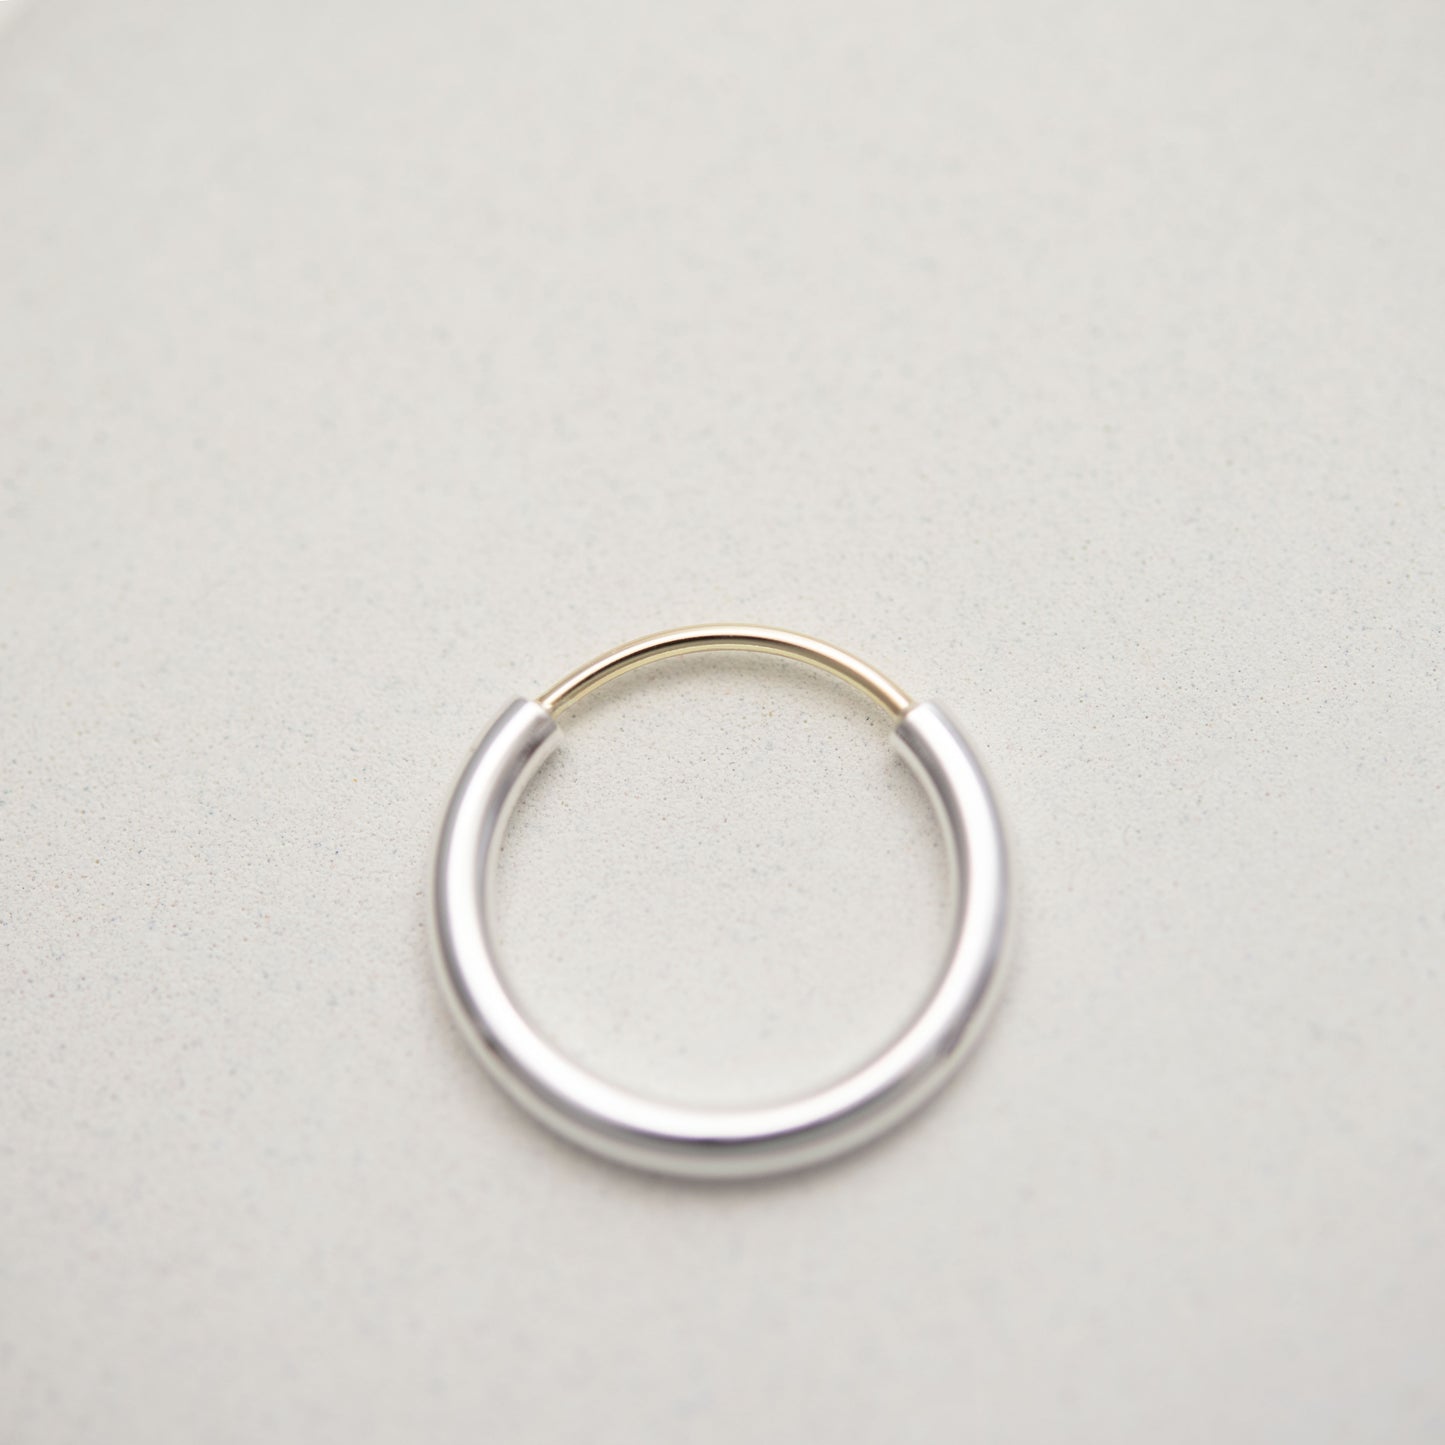 Contemporary engagement ring by AgJc